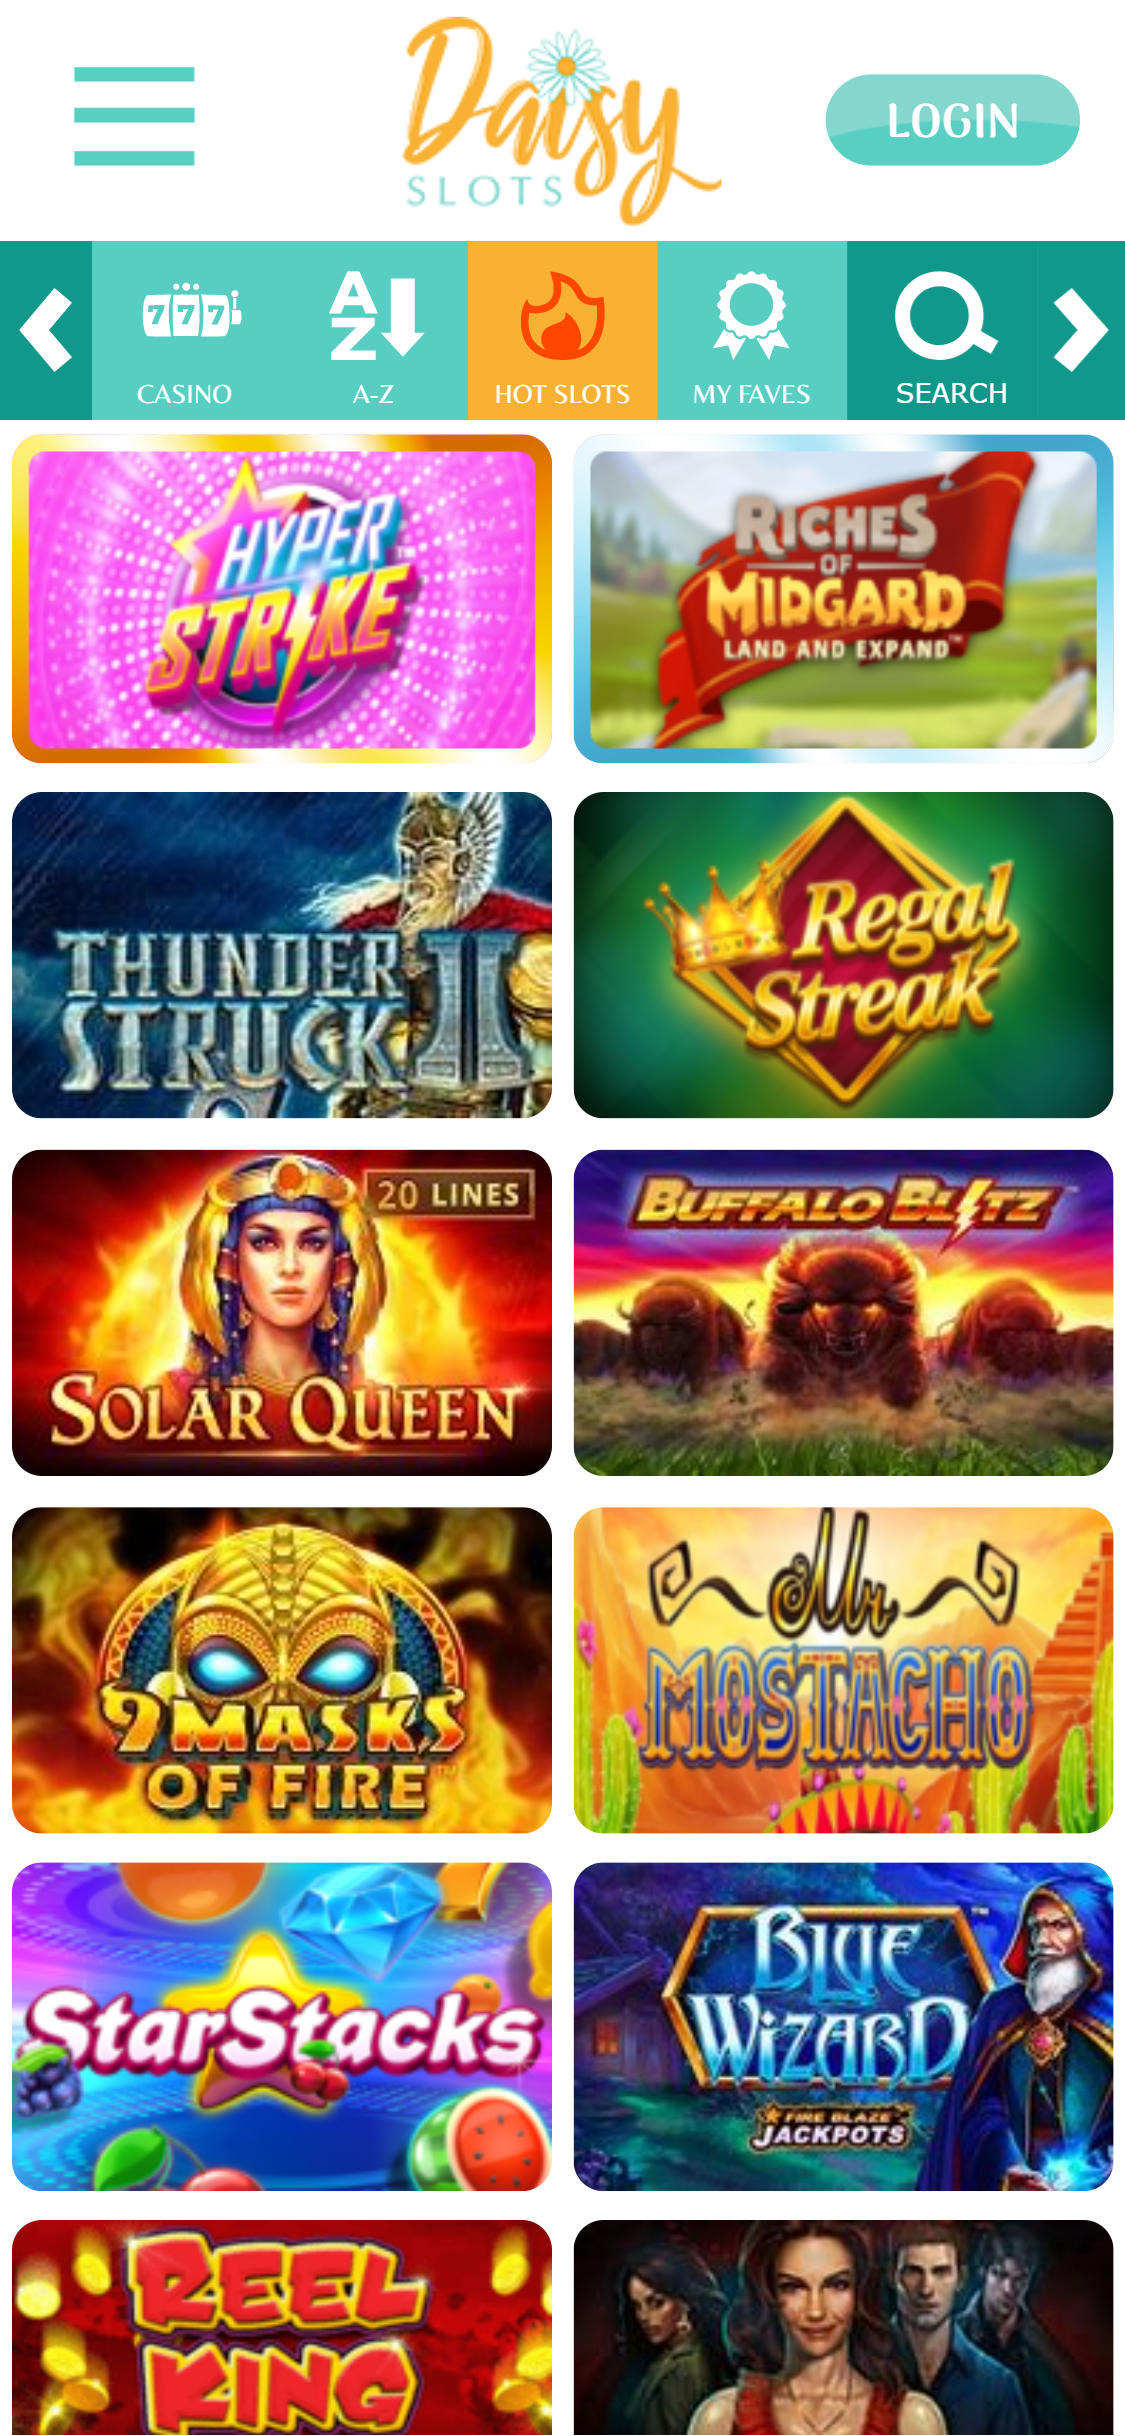 Daisy Slots Casino Mobile Games Review